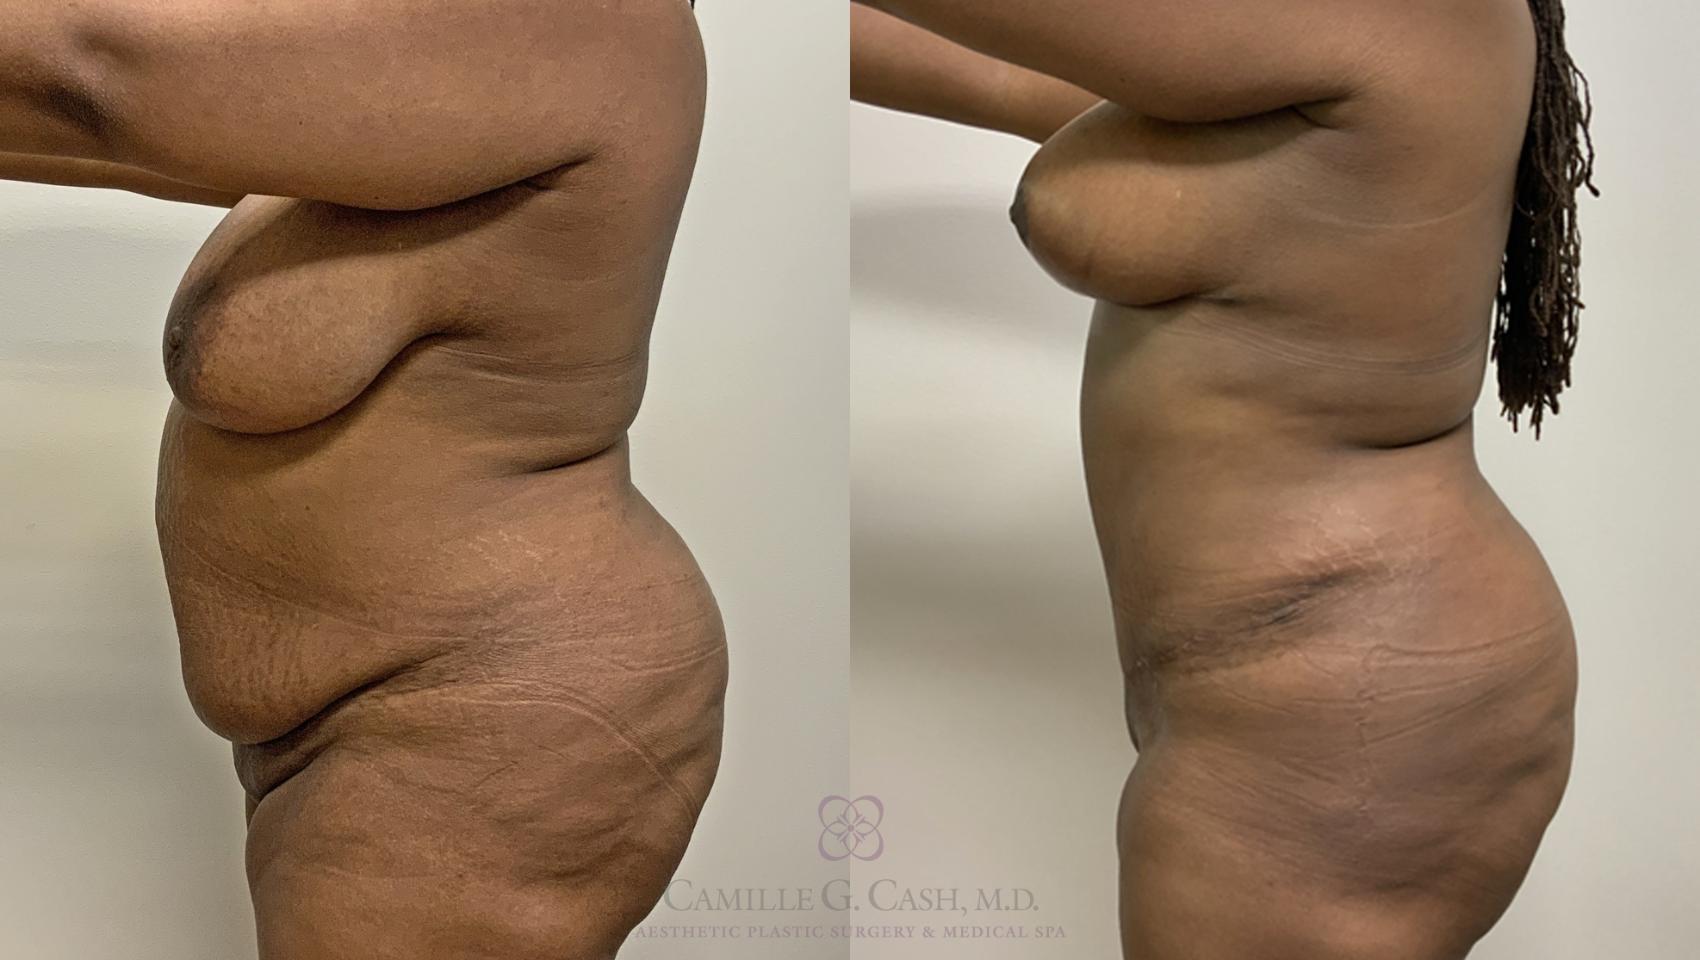 Before and after a tummy tuck, liposuction, and breast reduction